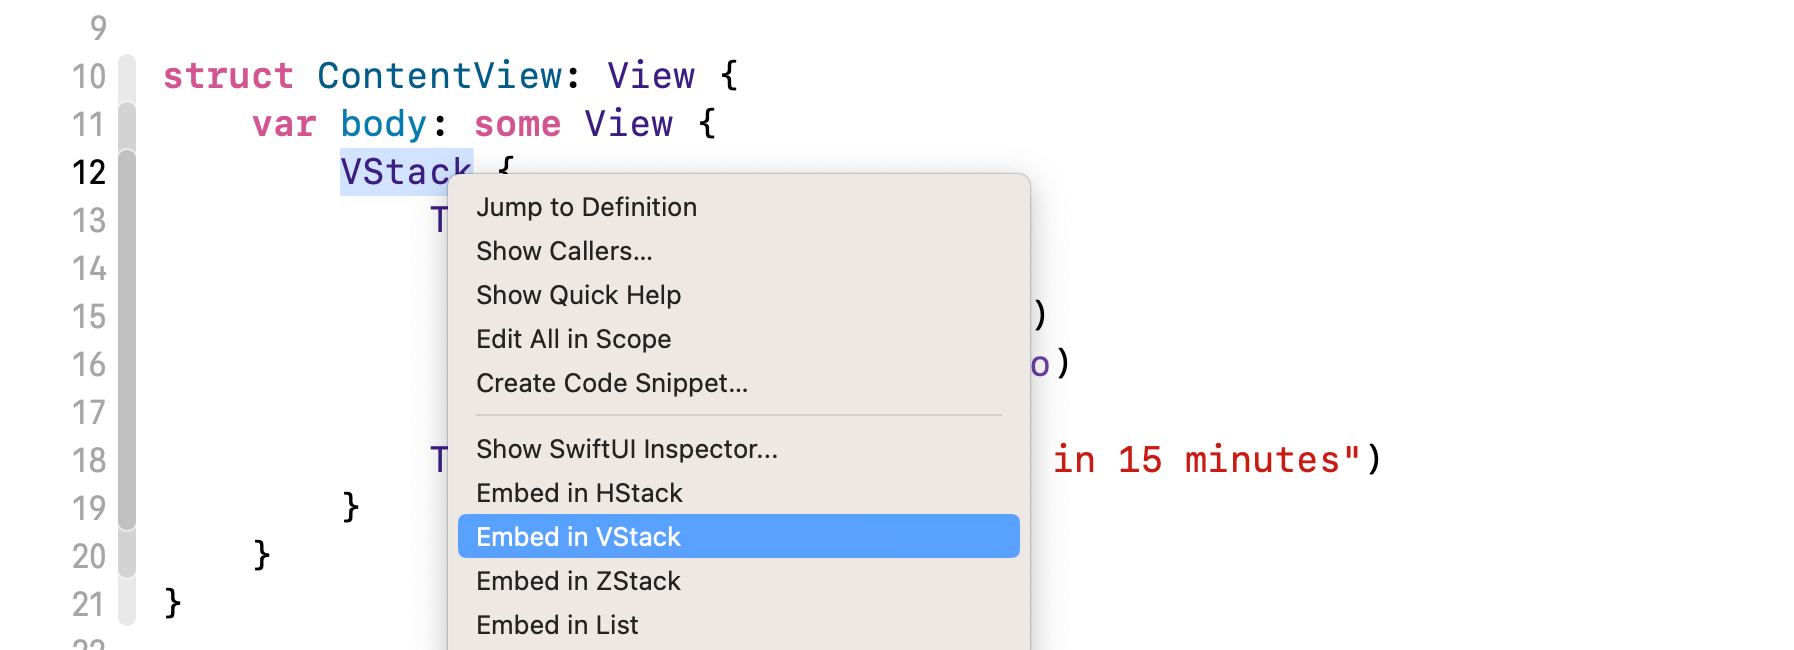 Figure 4-8. Embedding the current VStack in another VStack view